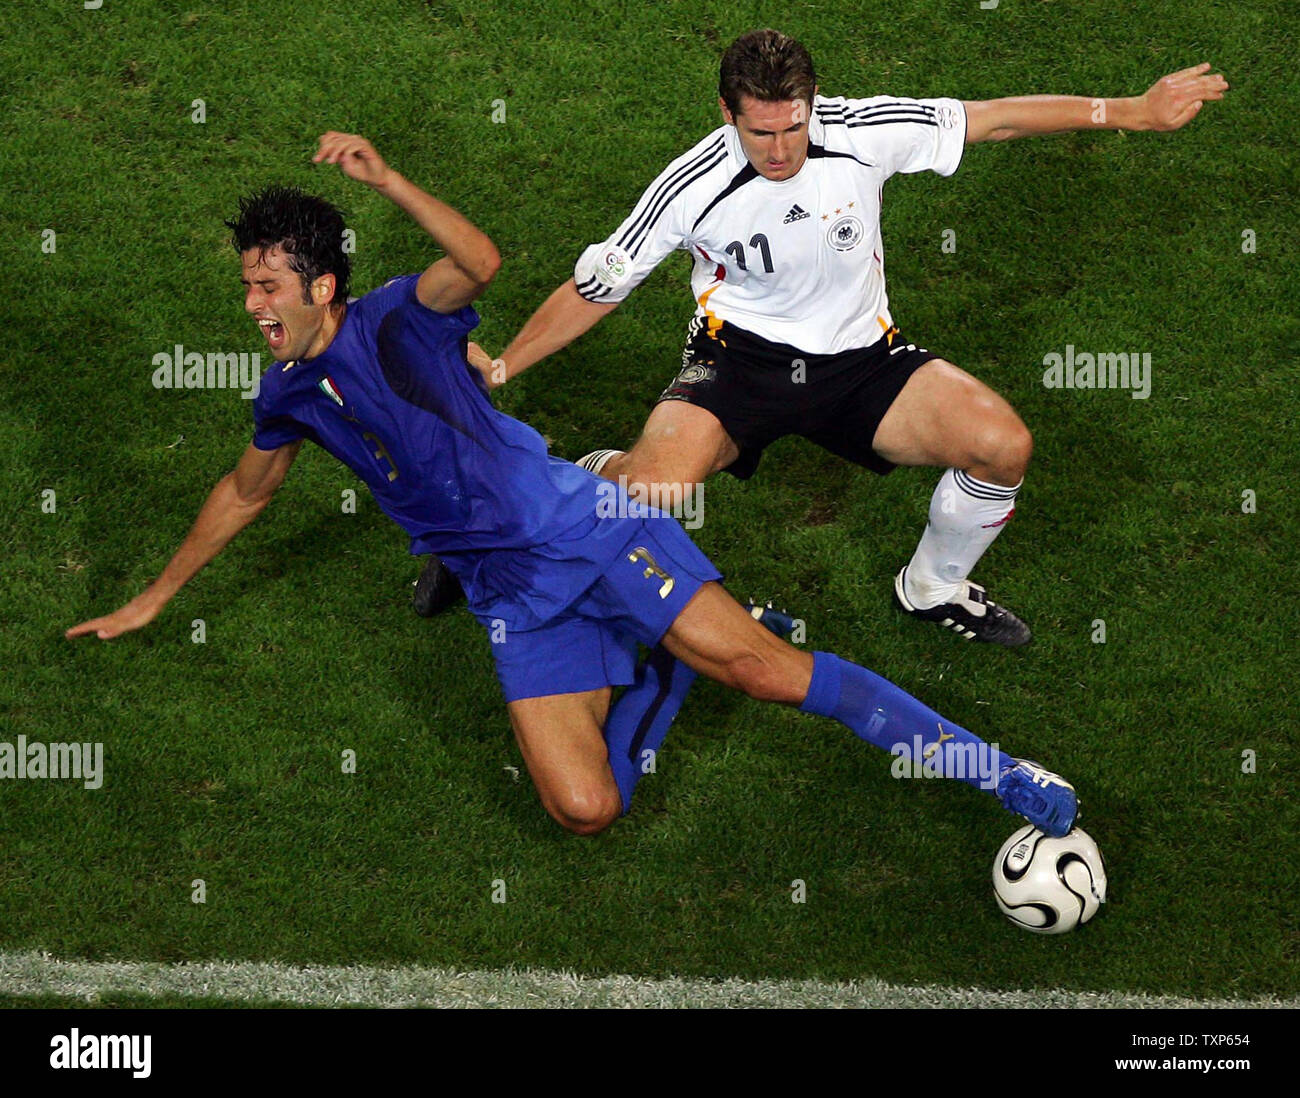 Germany's Miroslav Klose and Italy's Fabio Grosso fight for the ball during World Cup soccer in Dortmund, Germany on July 4, 2006.  Italy defeated Germany 2-0.   (UPI Photo/CHRISTINE BRU                     ) Stock Photo